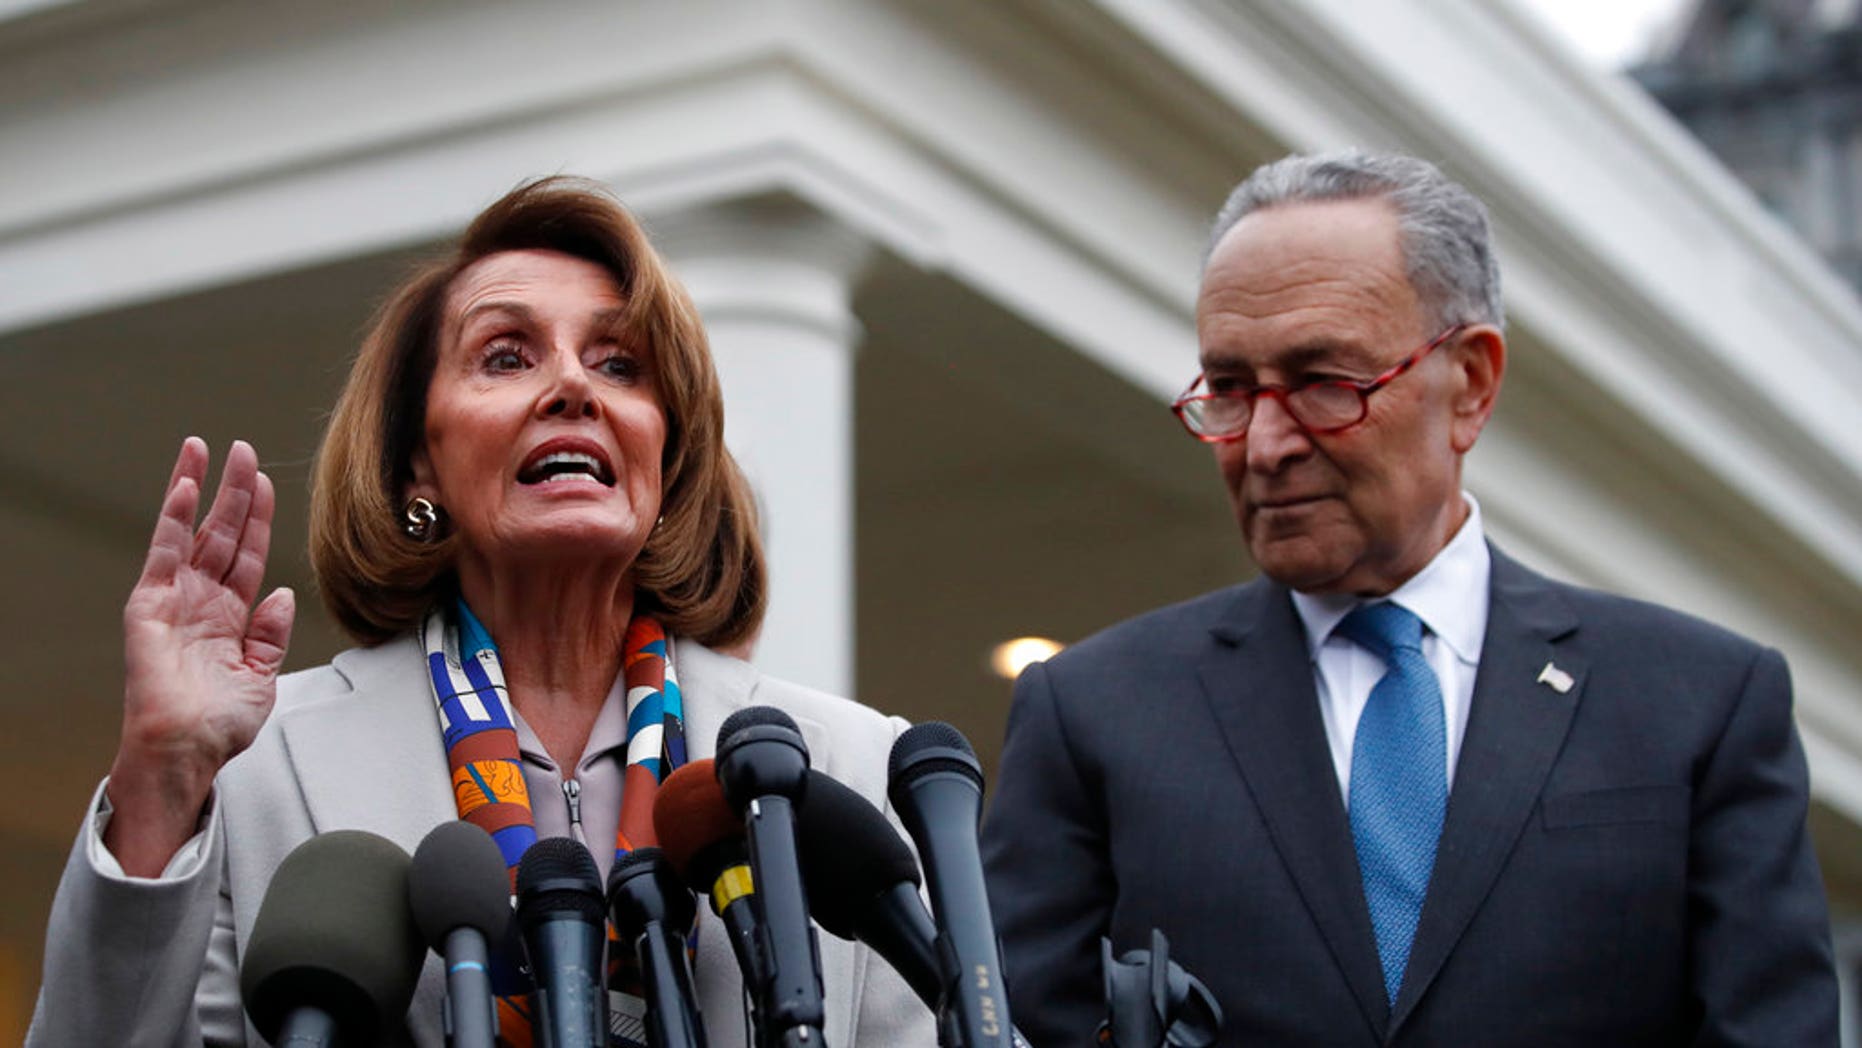 FOX NEWS FIRST: New Congress convening as Dems show no shutdown compromise; Trump fires back at Romney